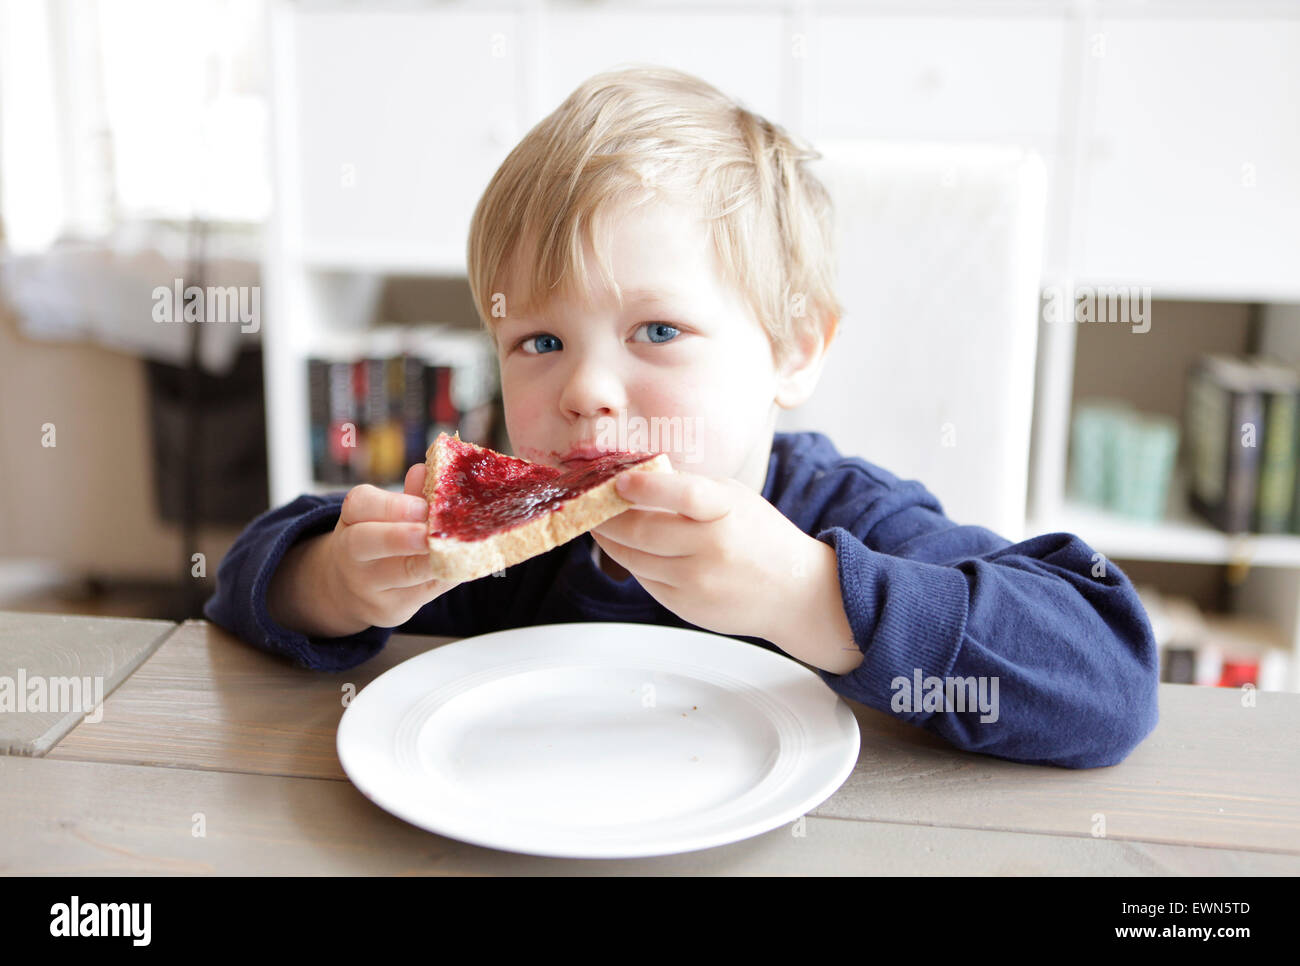 a blond boy sitting at a table and eating a jam sandwich Stock Photo